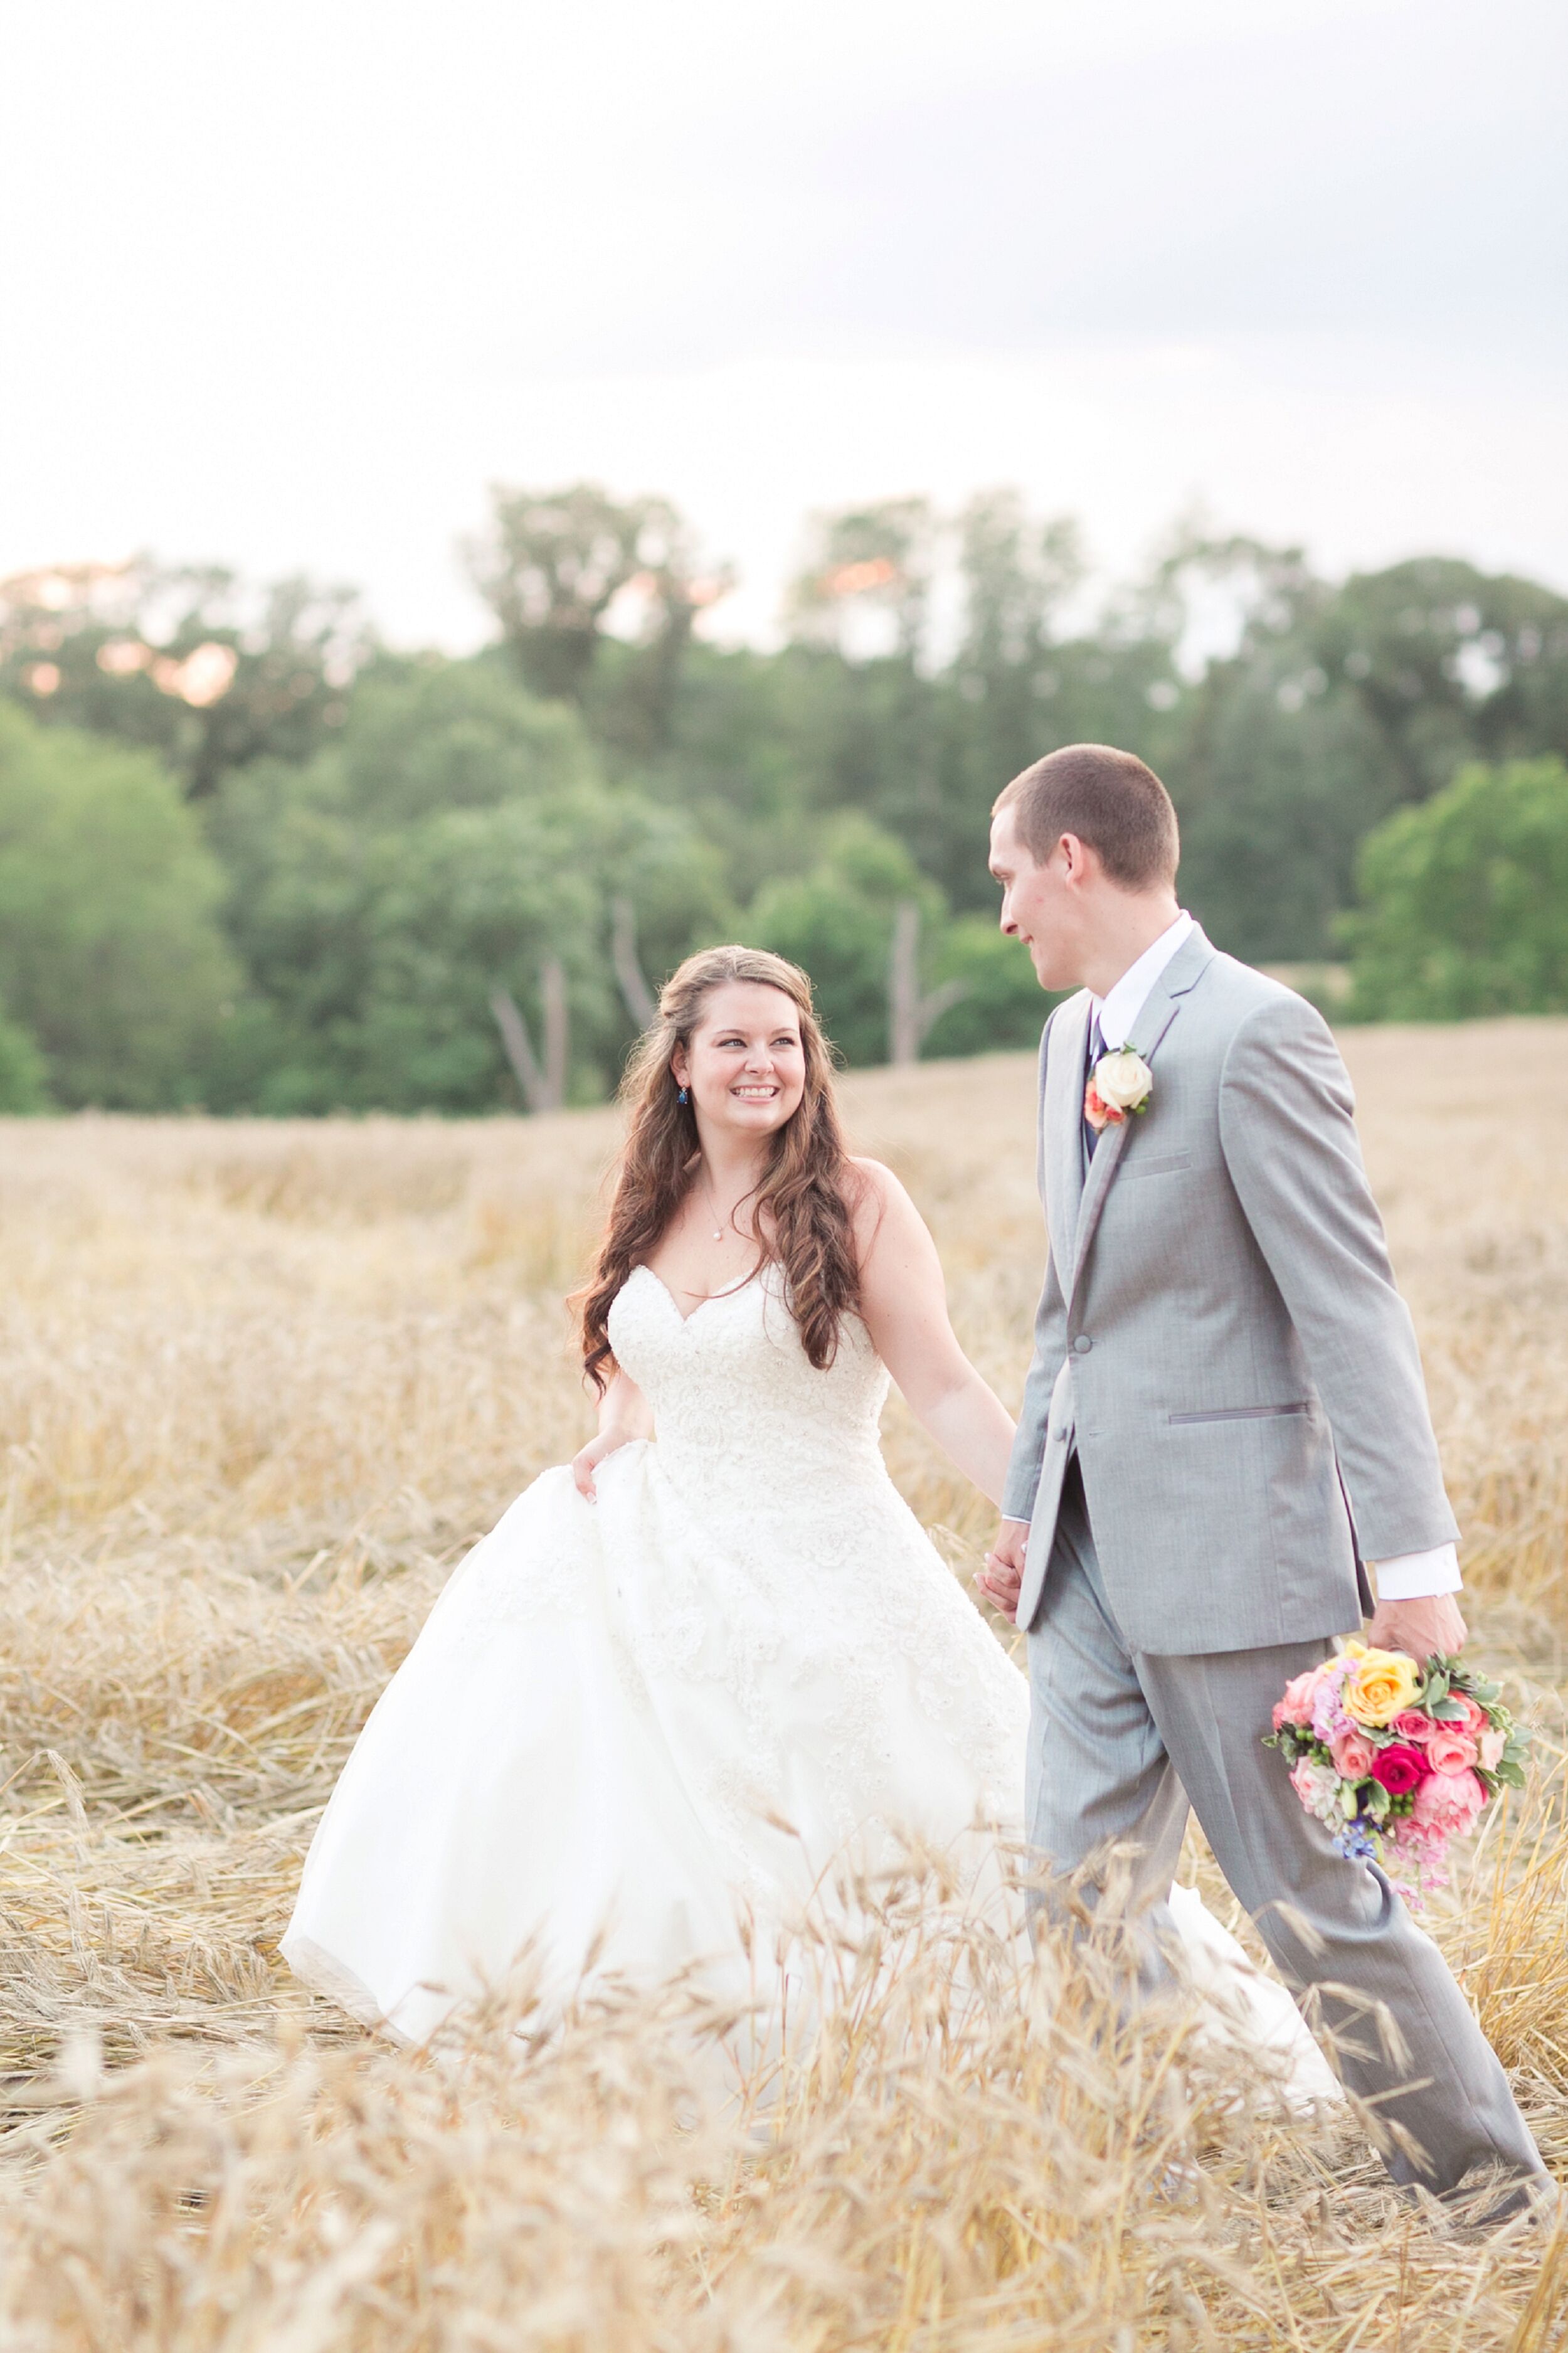 A Sophisticated Country Wedding  at Paynefield Farm in 